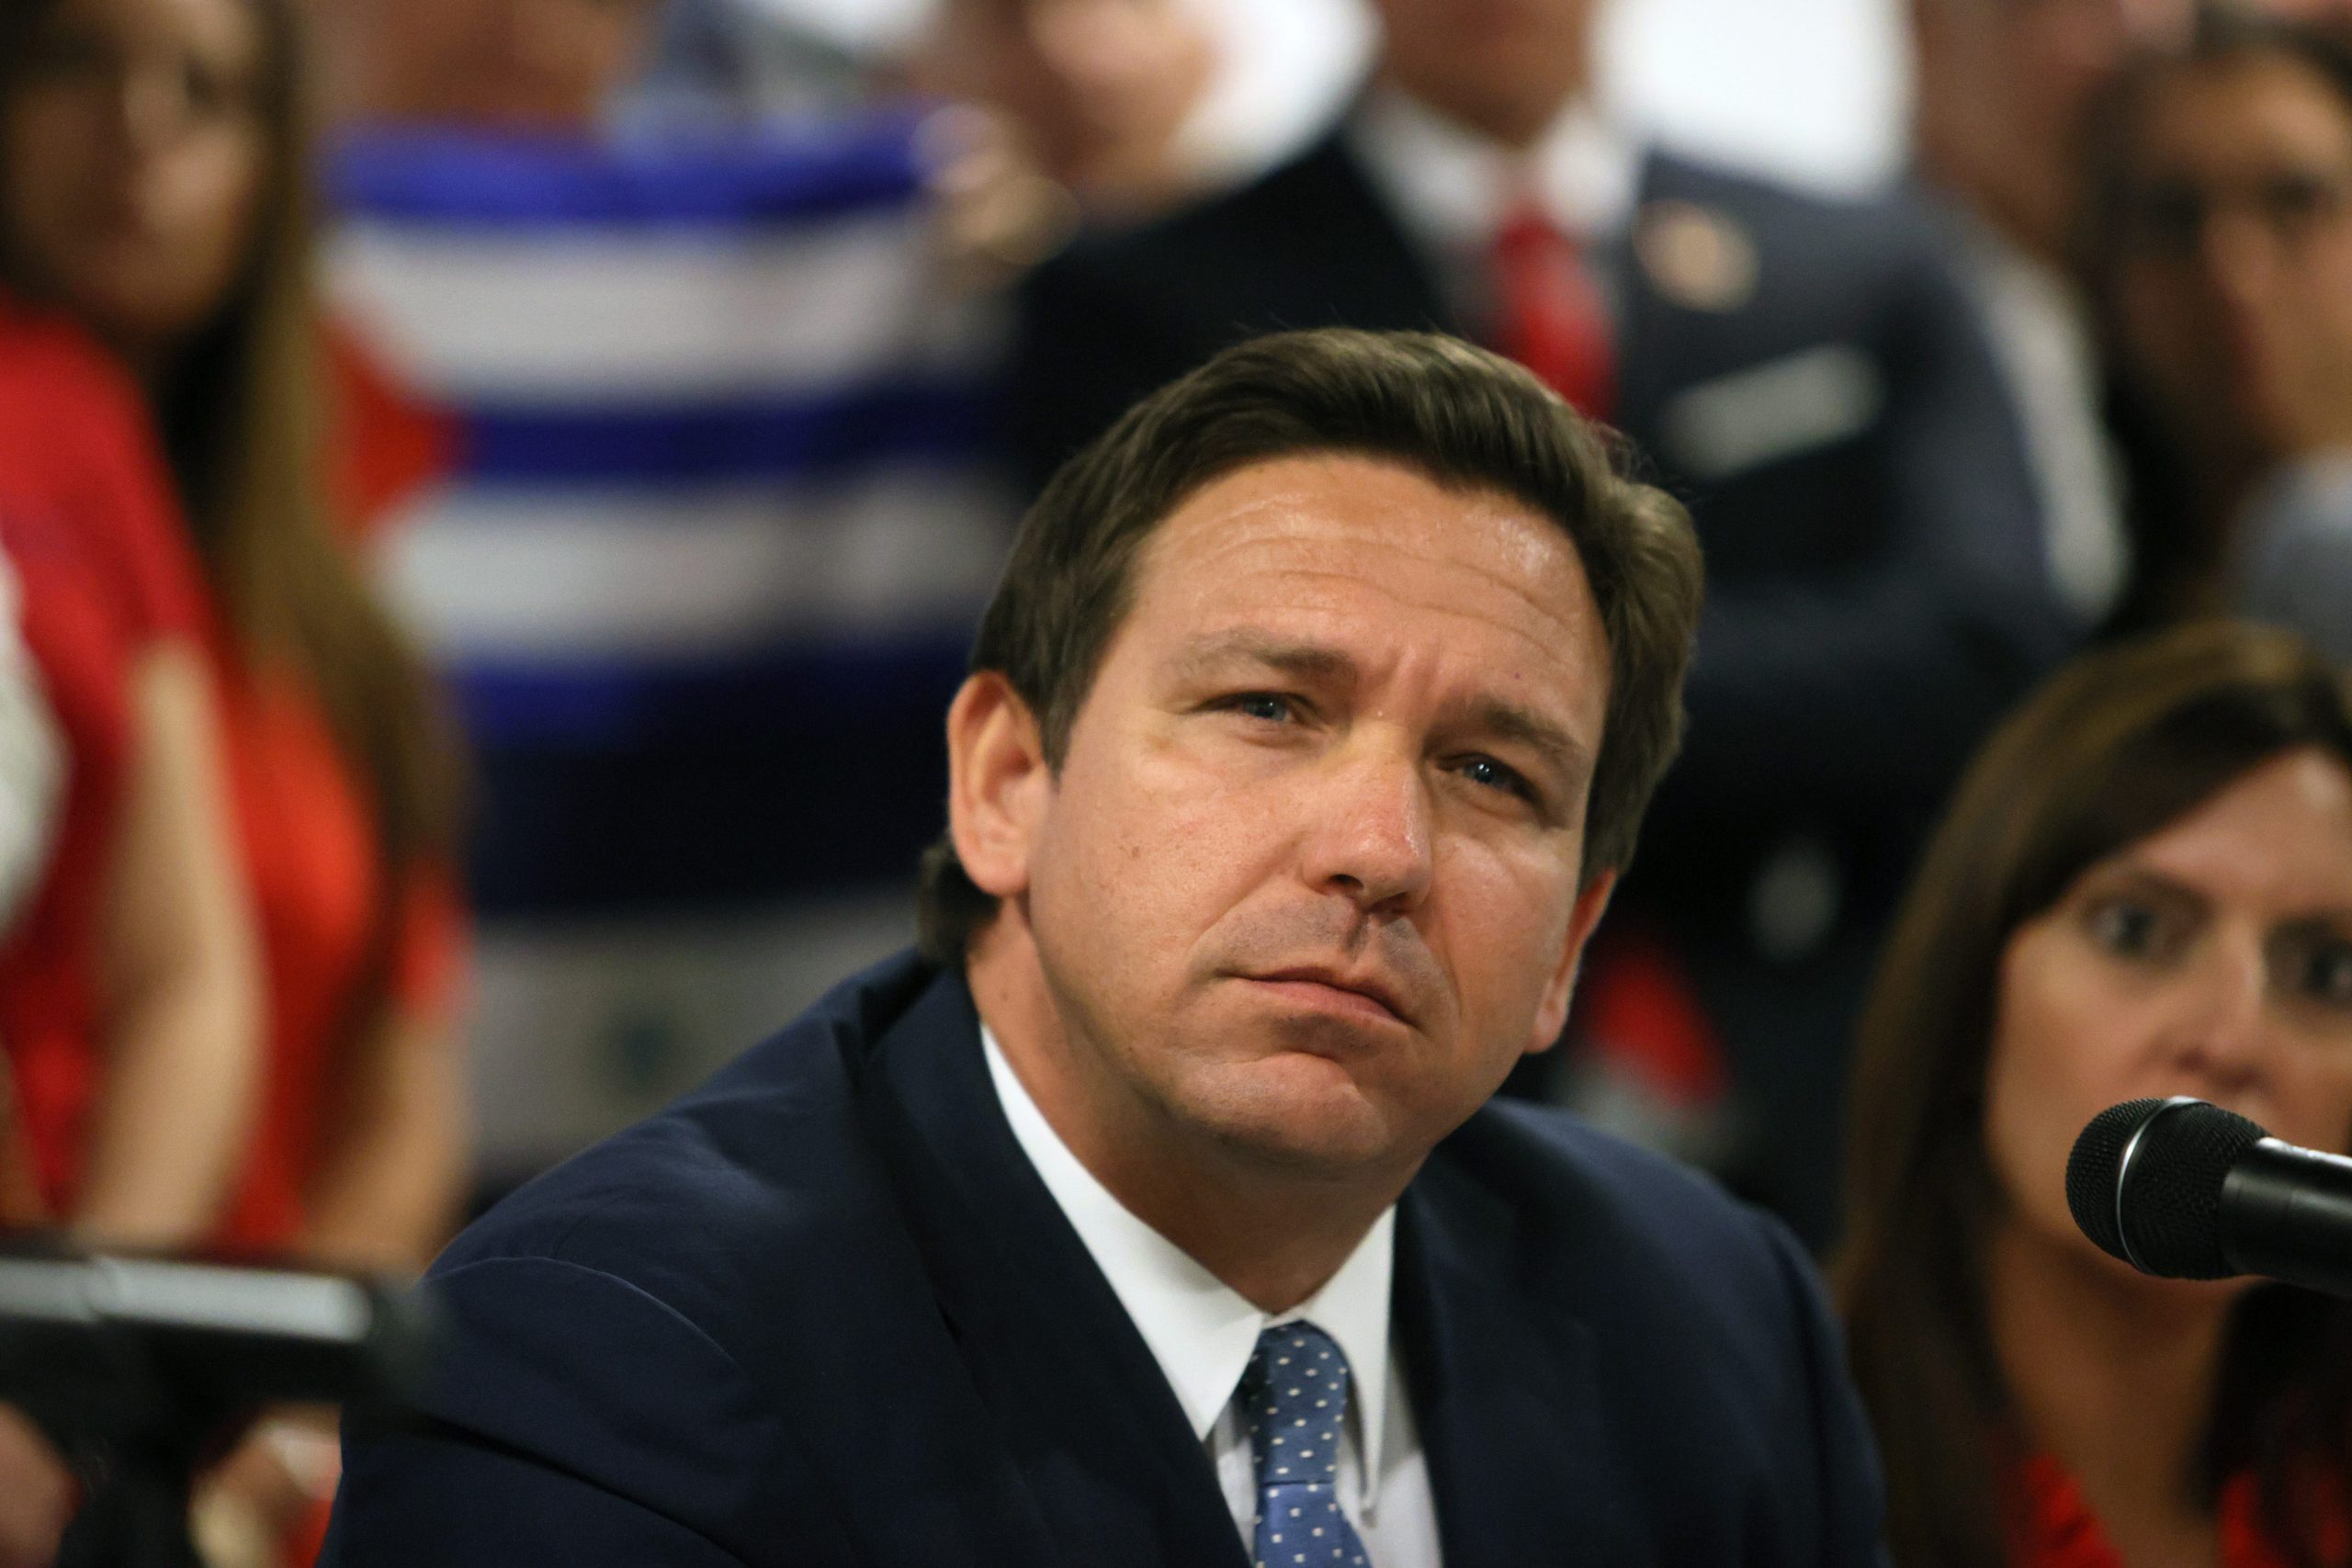 Florida Governor Ron DeSantis wears a black suit and blue tie and looks into the distance.